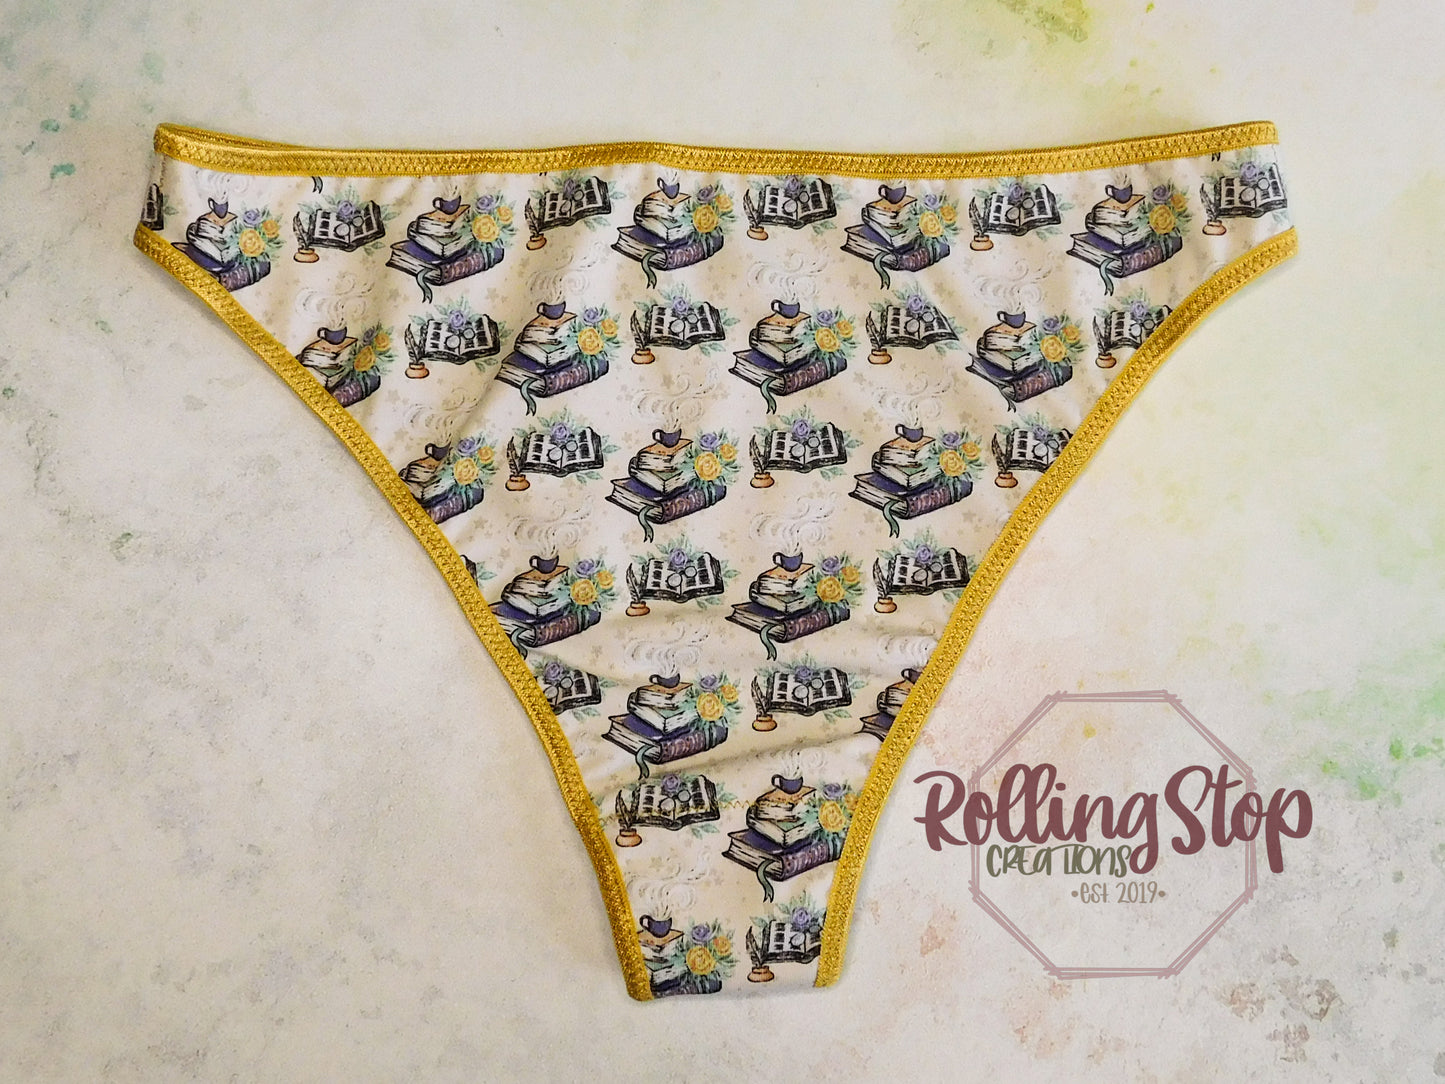 Read Me Lace Back Pantydrawls by Rolling Stop Creations sold by Rolling Stop Creations Lace - Lingerie - Panties - Pant